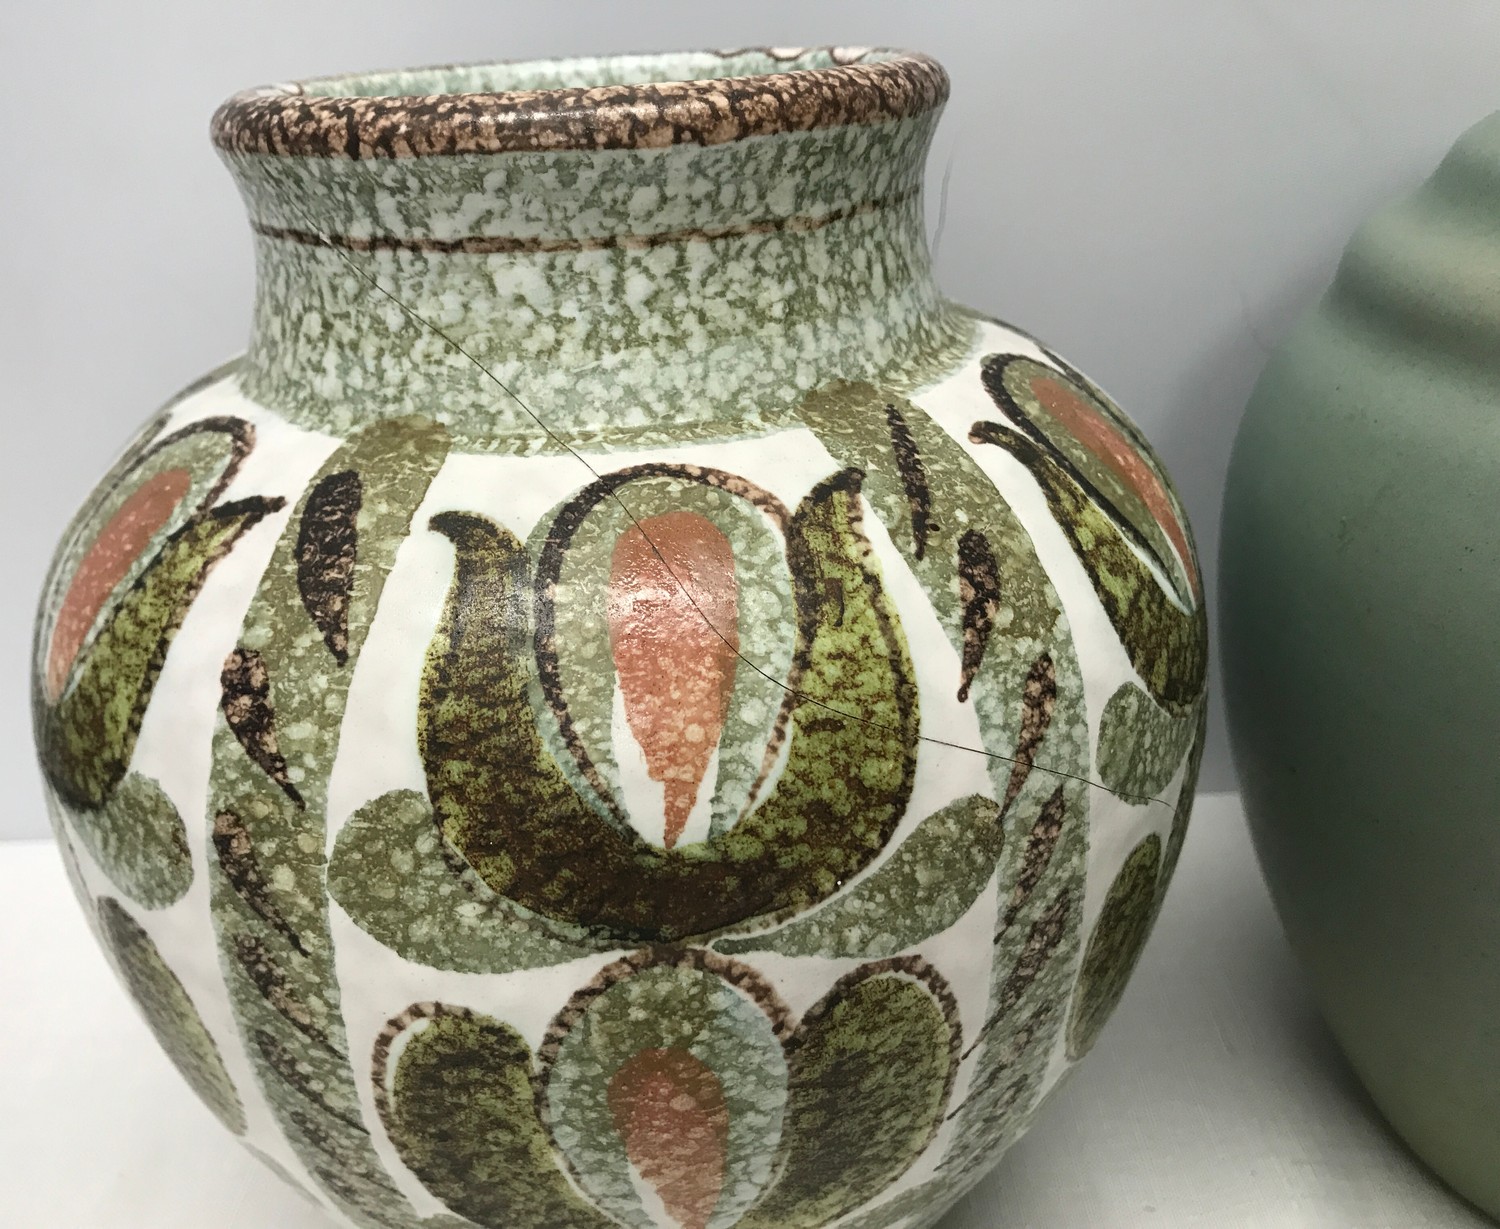 Denby stoneware Glyn Colledge design vase a/f. 23cm H and another green glaze stoneware vase 22cm - Image 2 of 4